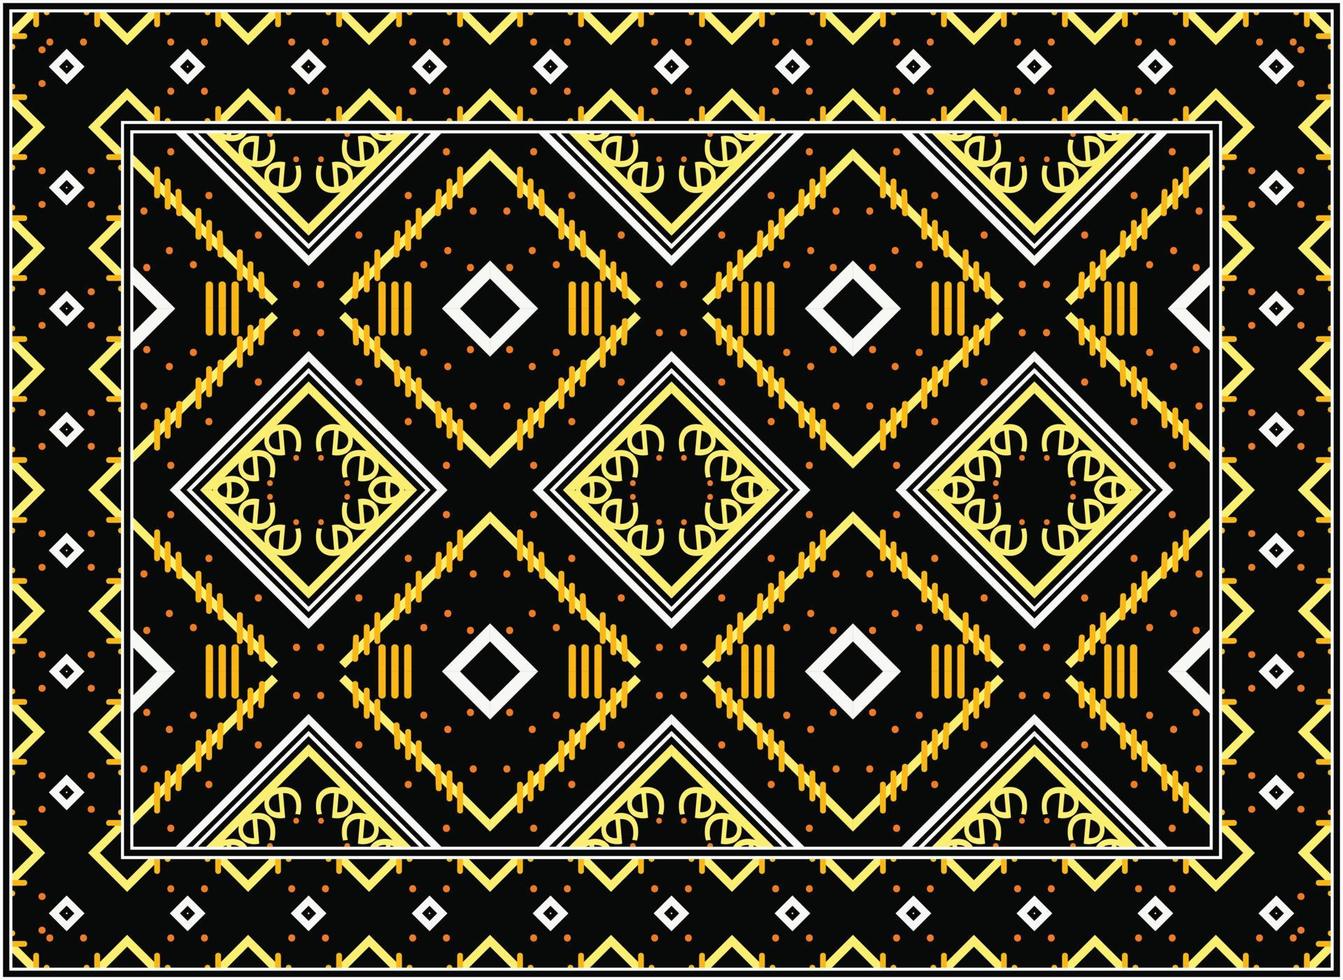 Persian rug modern living room, Motif Ethnic seamless Pattern Boho Persian rug living room African Ethnic Aztec style design for print fabric Carpets, towels, handkerchiefs, scarves rug, vector